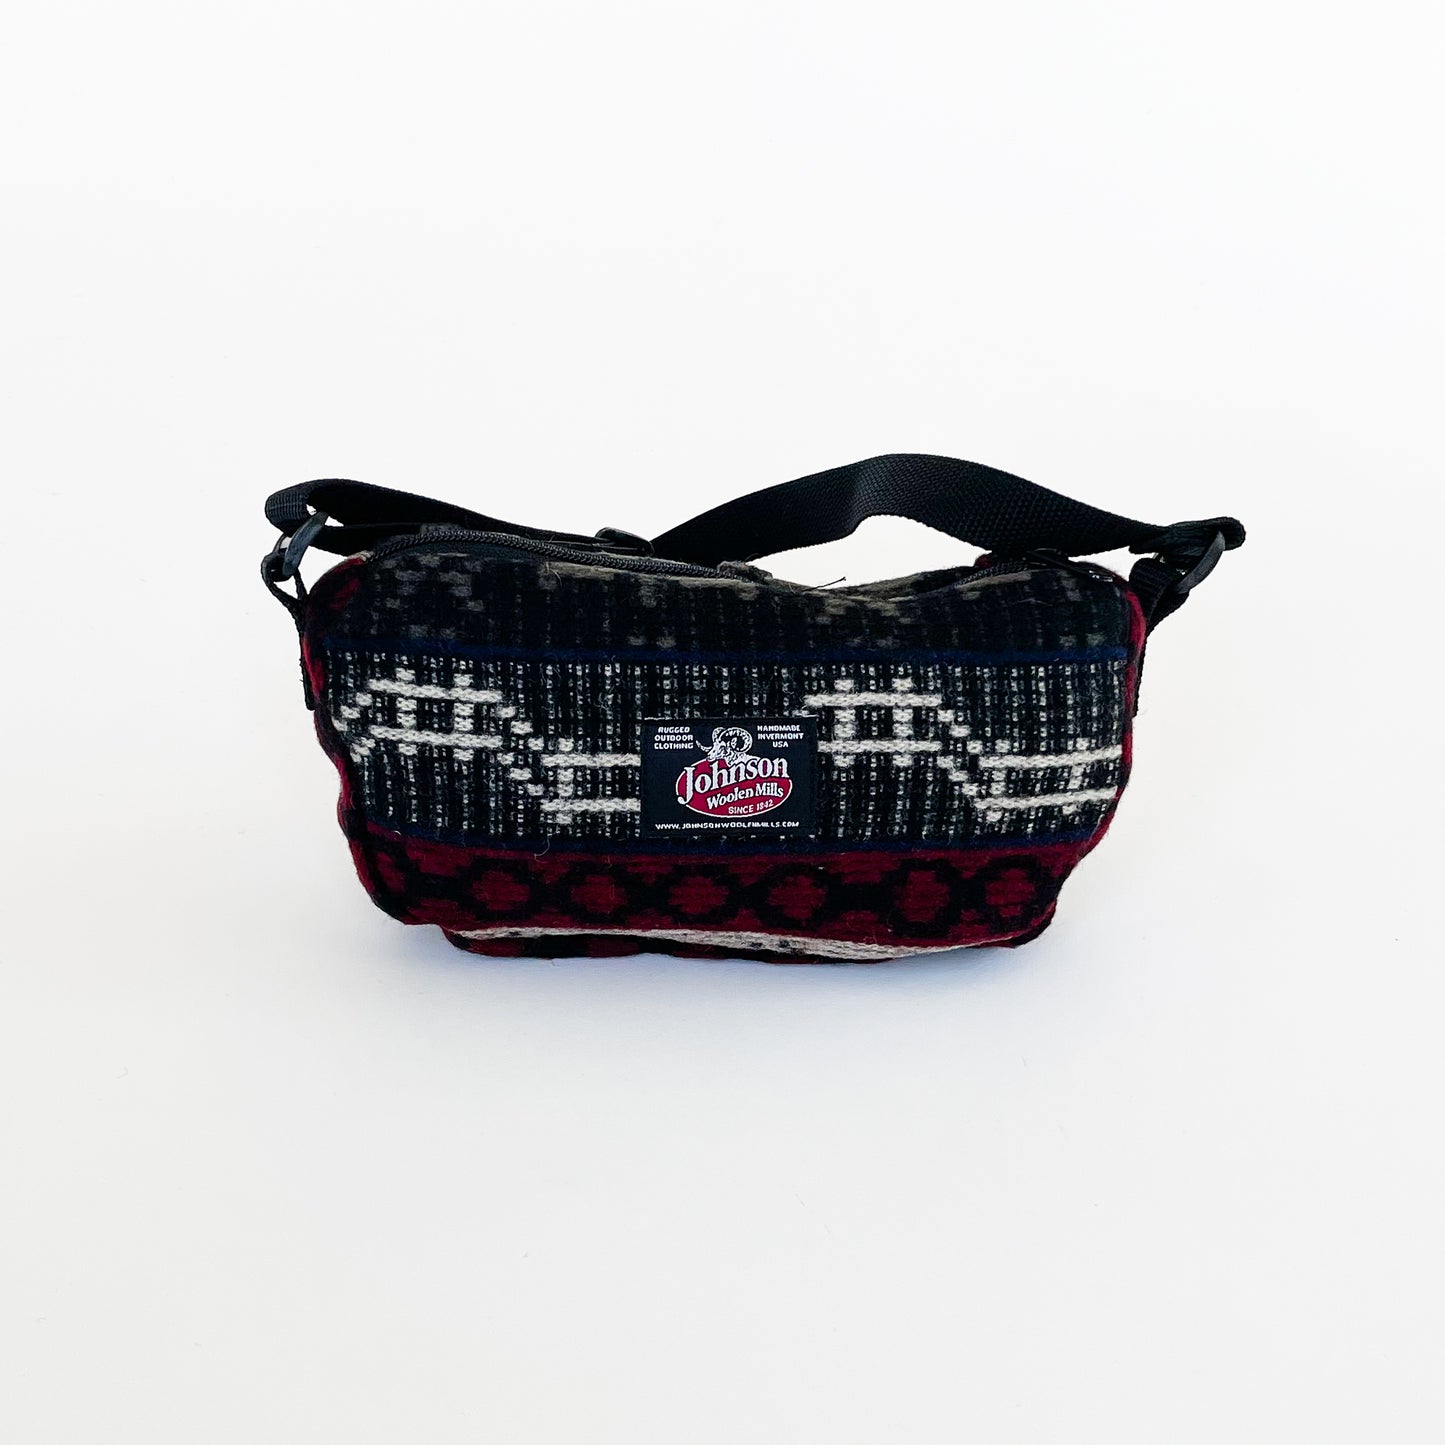 Wool sidewinder bag with strap - bag with zipped closure and belt loops for wearing on your waist plus shoulder strap. Shown in gray, red and green plaid